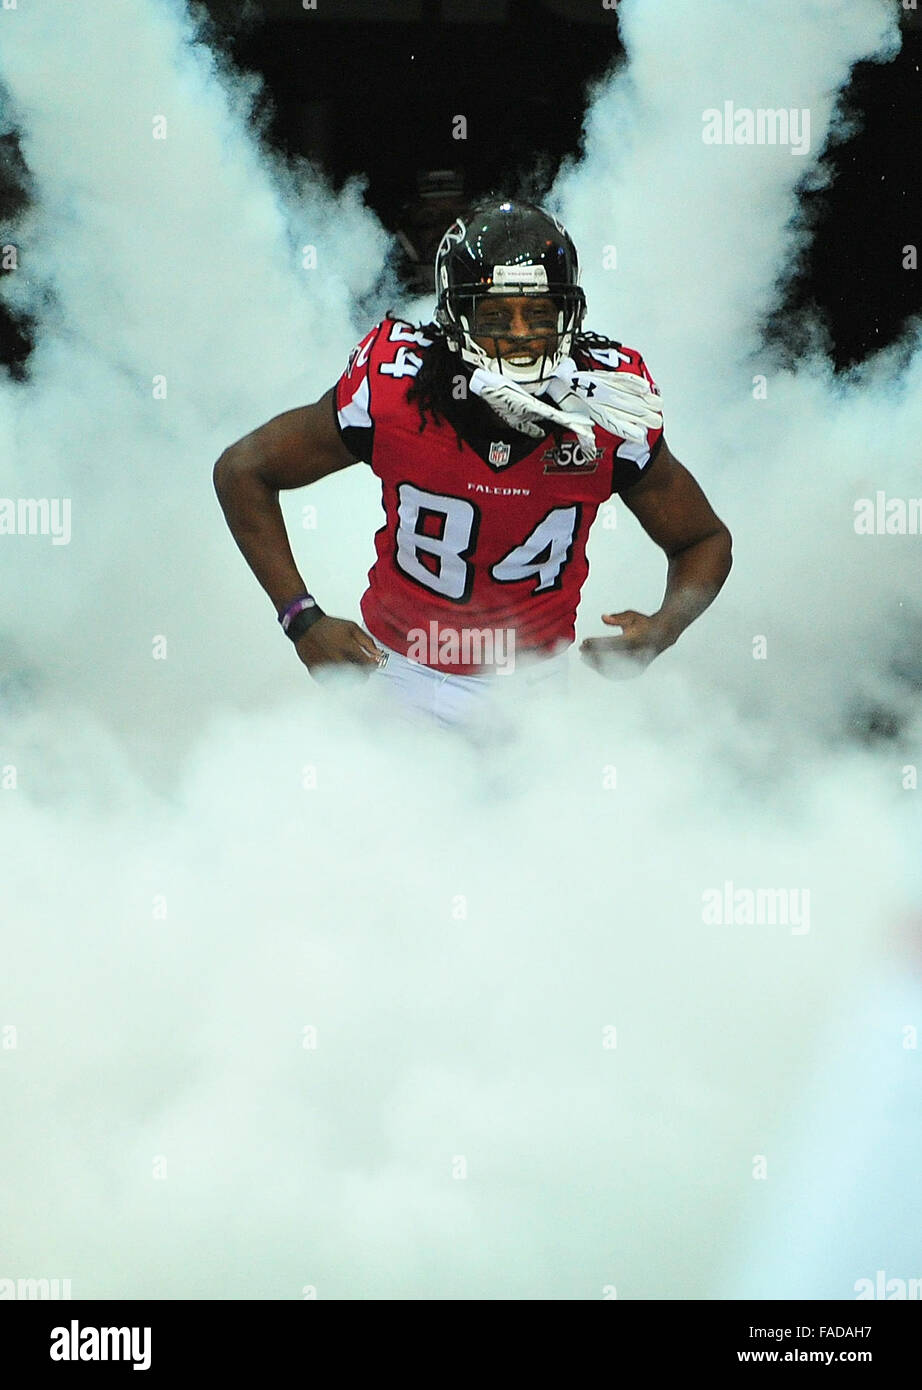 Atlanta, Georgia, USA. 27th Dec, 2015. Atlanta Falcons WR Roddy White (#84) in action during NFL game between Carolina Panthers and Atlanta Falcons in the Georgia Dome in Atlanta Georgia. The Atlanta Falcons won the game 20-13. Bill McGuire/CSM/Alamy Live News Stock Photo